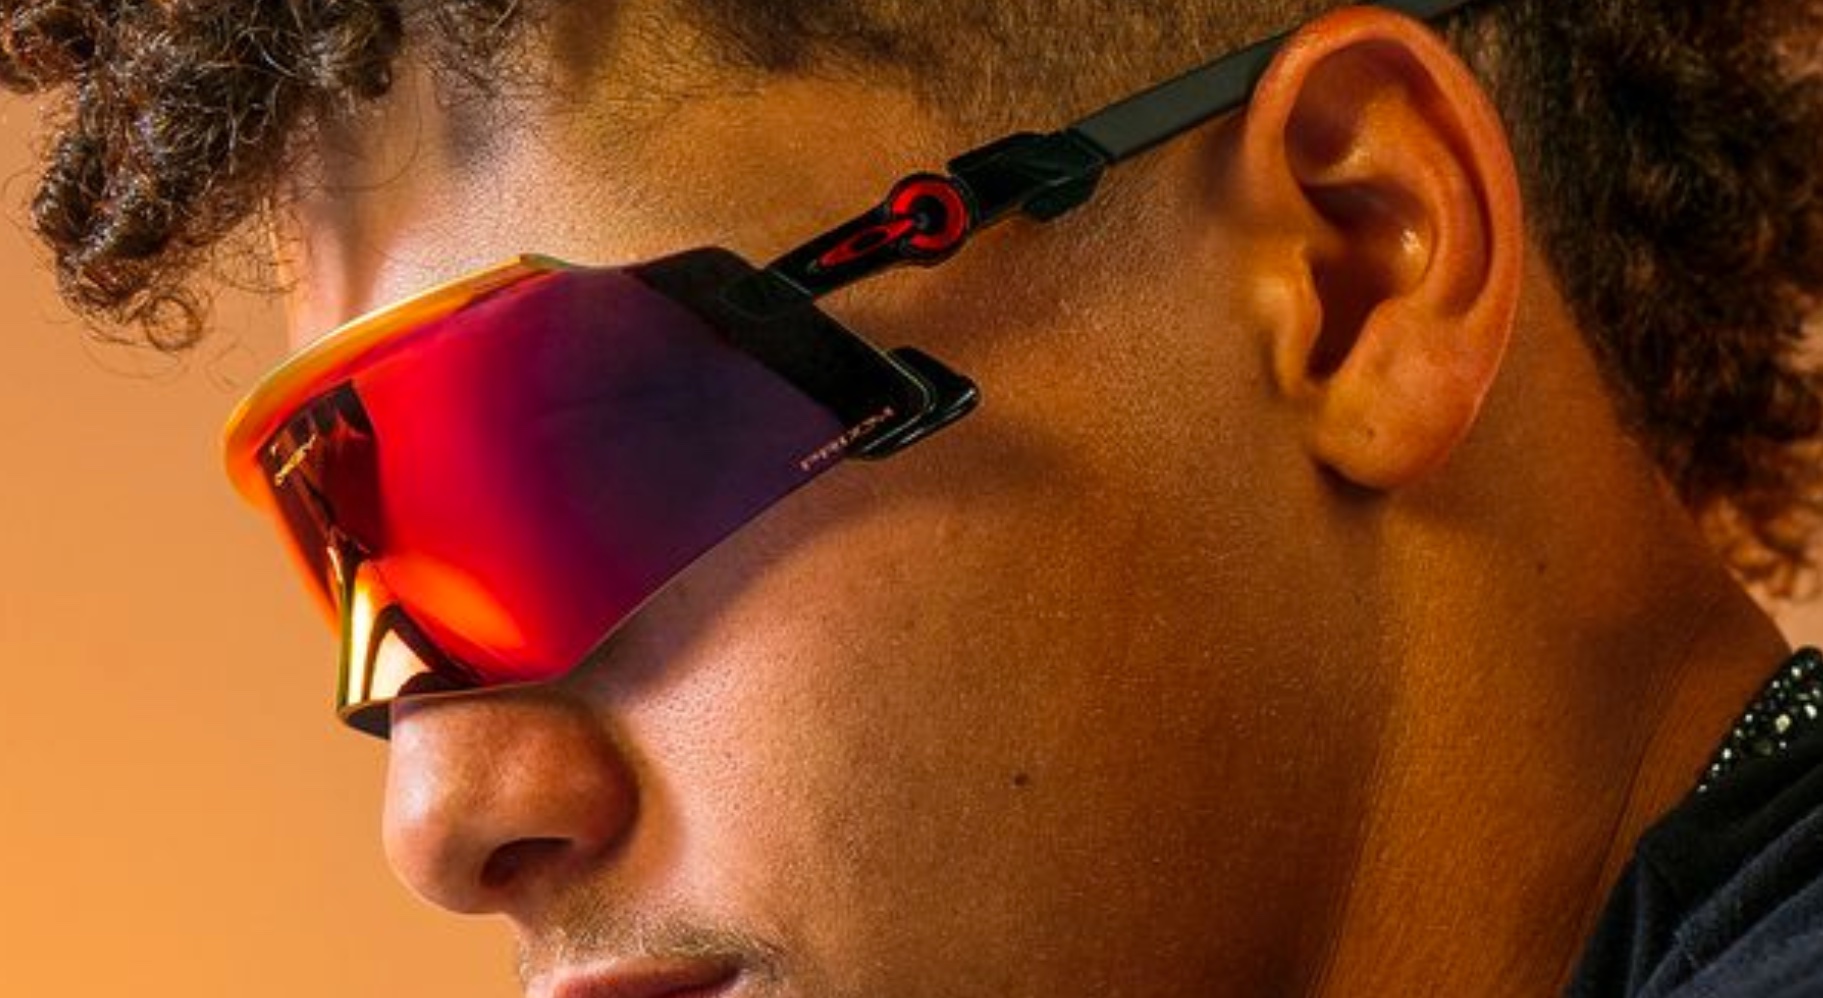 Oakley drops new 'Kato' sunglasses this summer that are made for